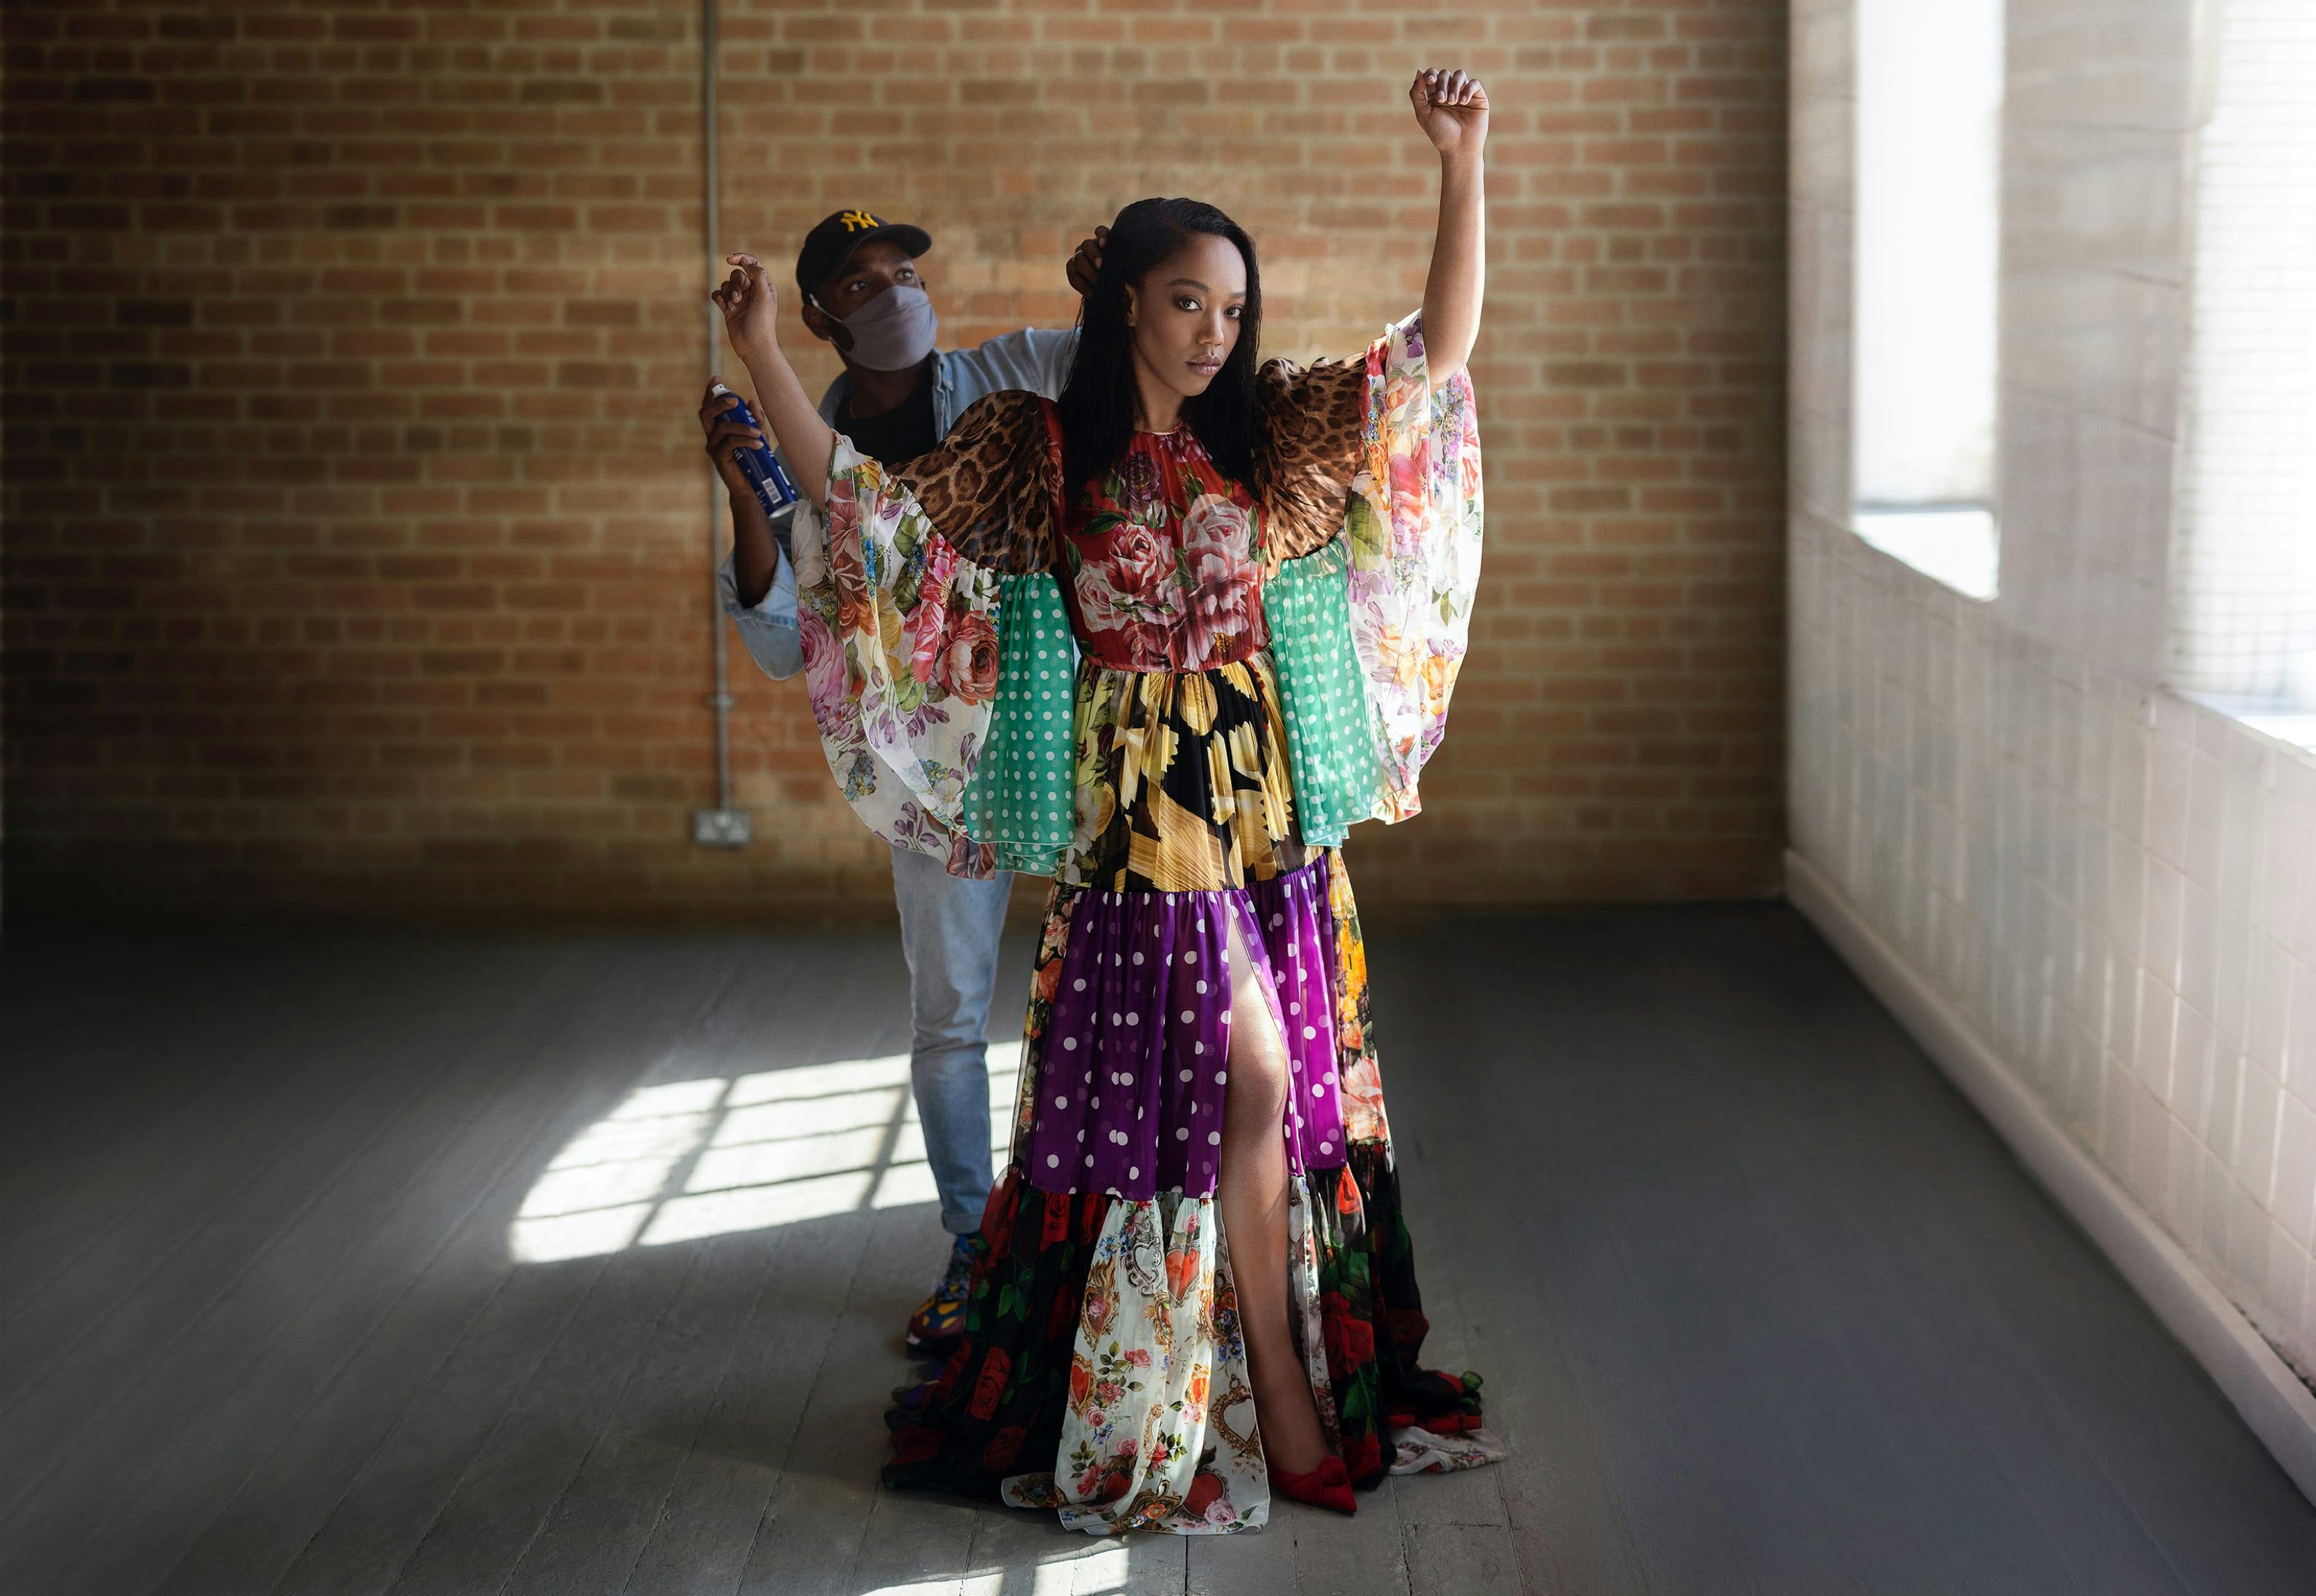 Naomi Ackie stands with her arms raised and wearing a colorful maxi dress of patchwork patterned fabrics. A hairstylist wearing a face mask stands behind Naomi, applying hairspray to her long dark hair.